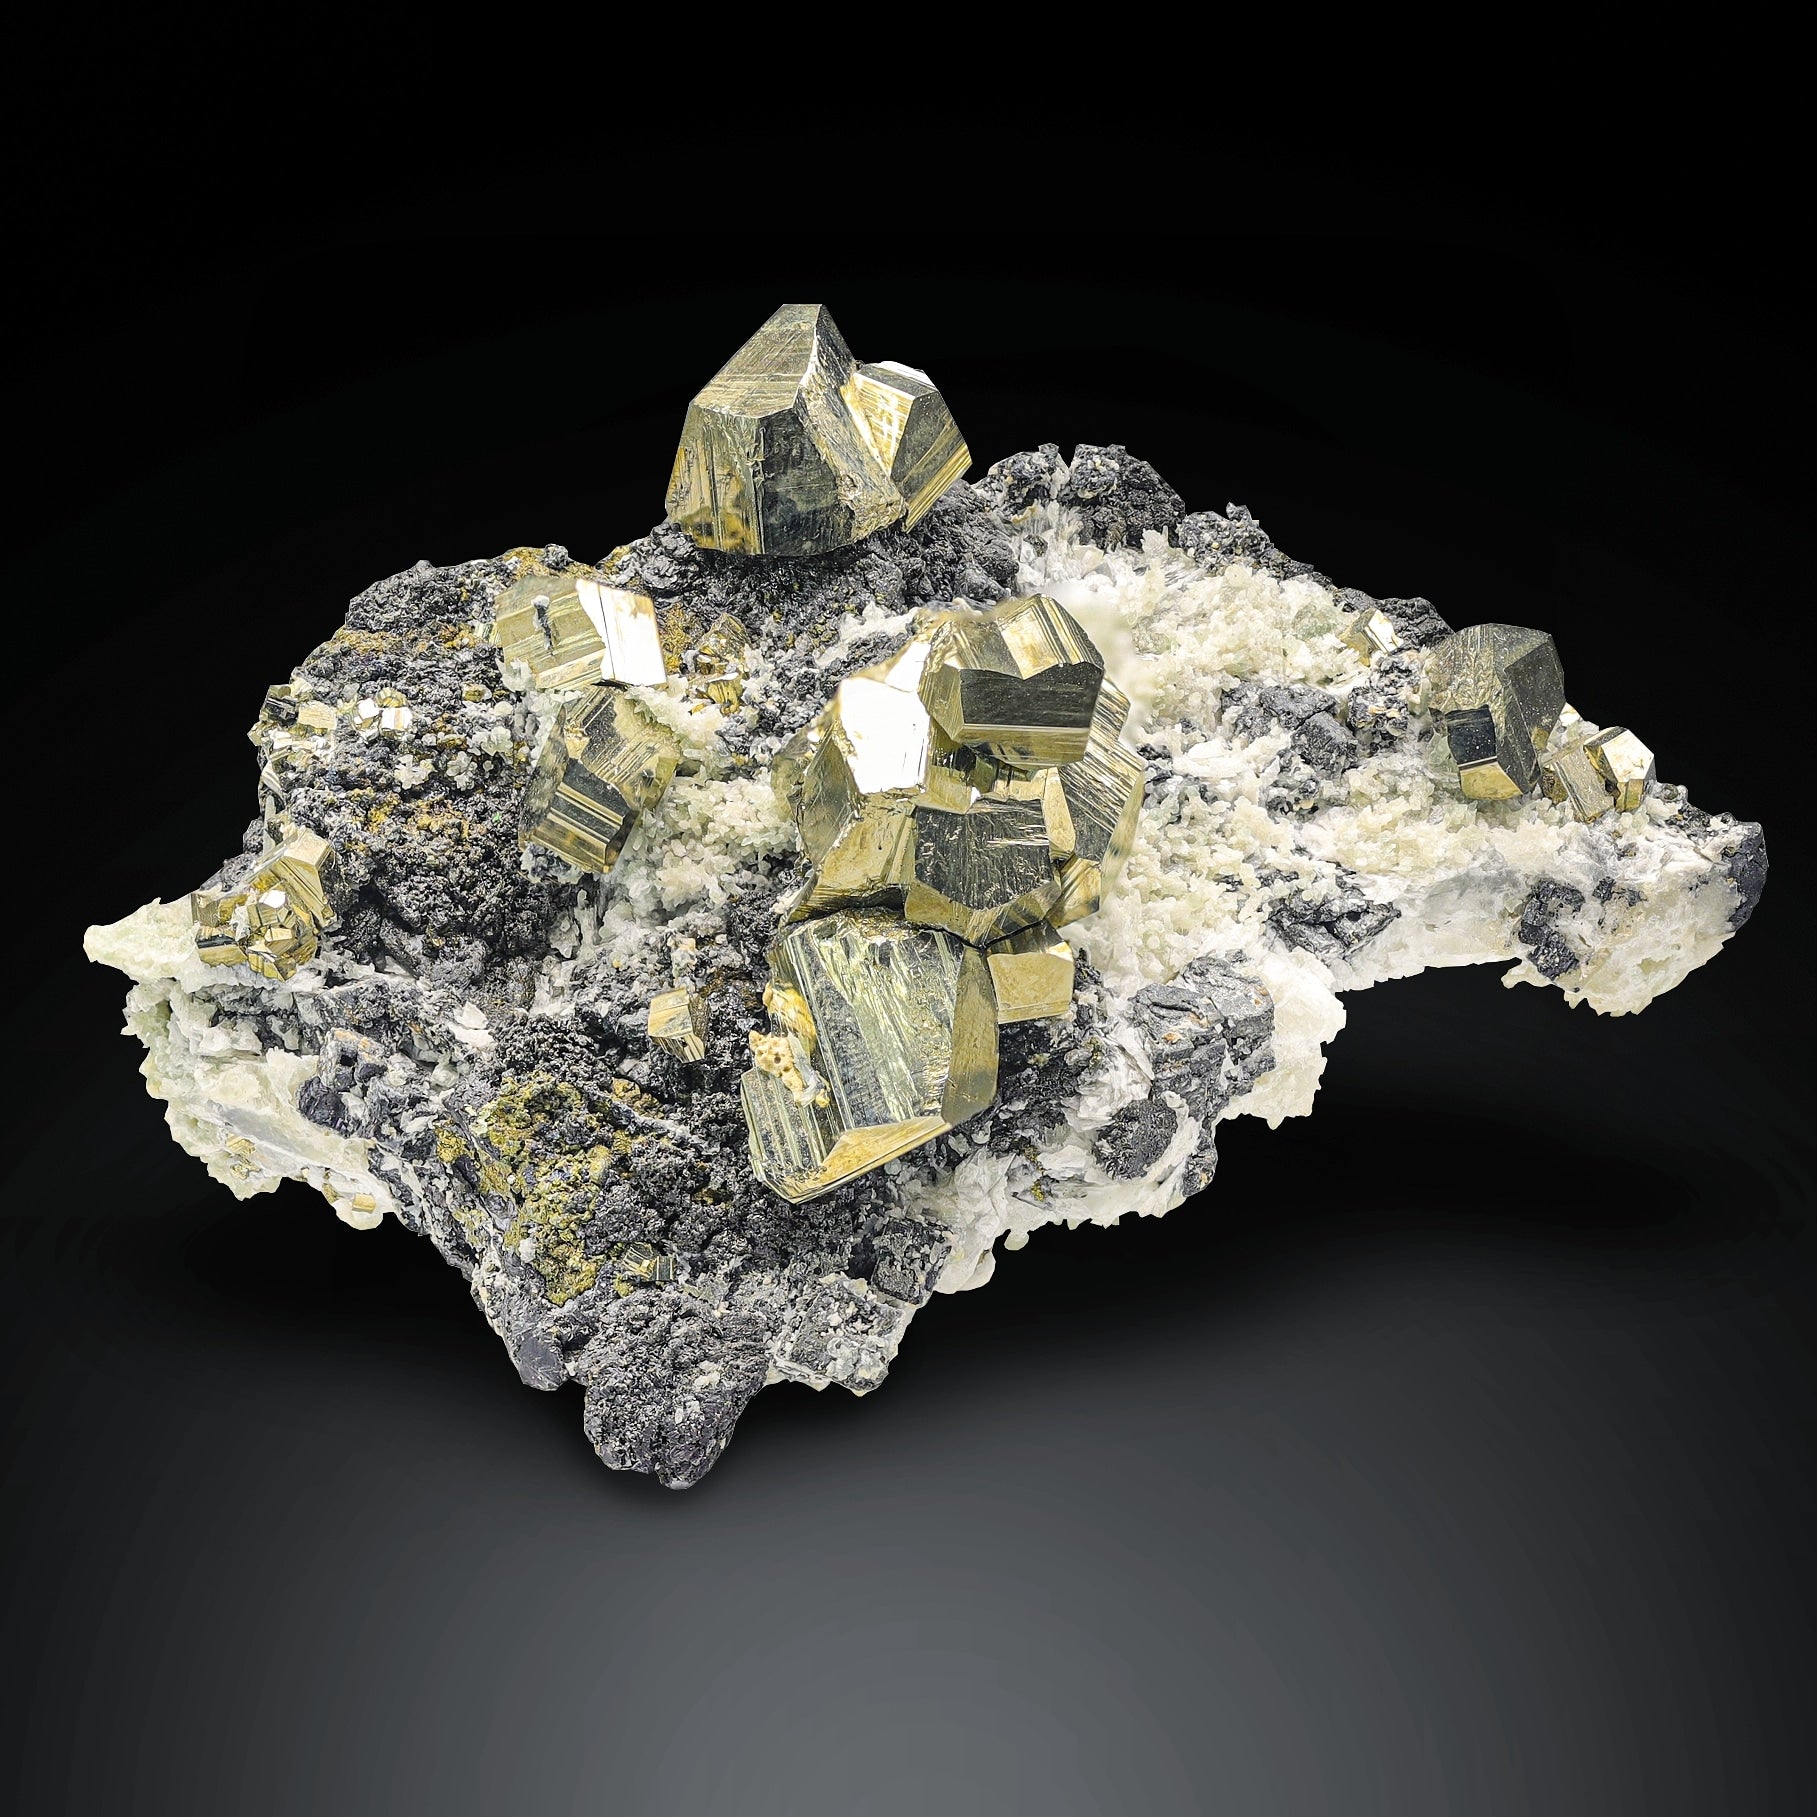 Glamming Golden color Intergrown Pyrite Crystals on Matrix from Pakistan